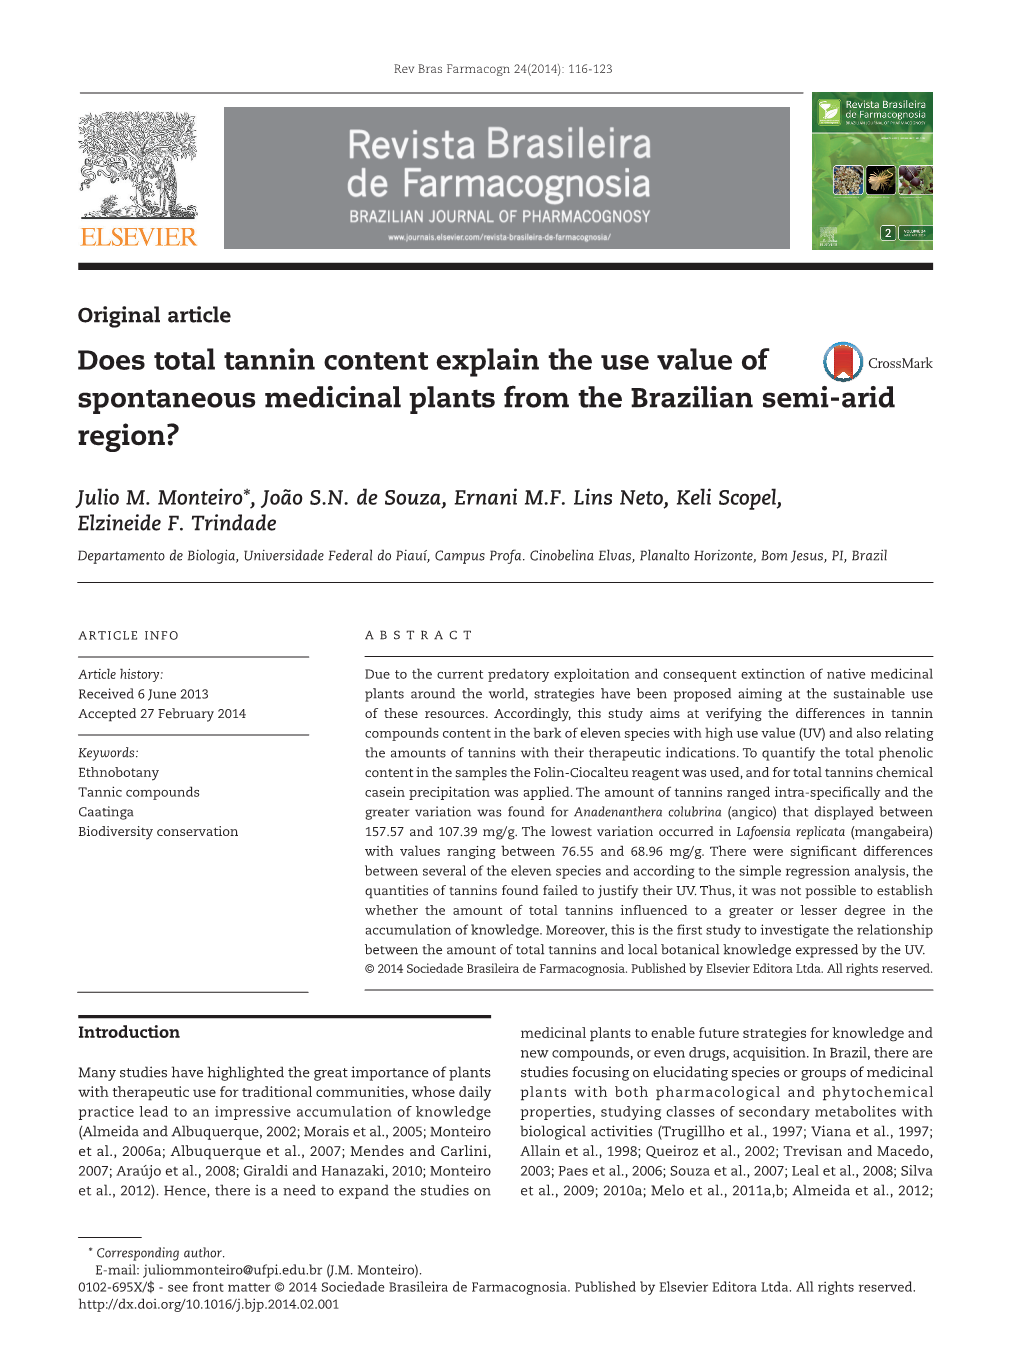 Does Total Tannin Content Explain the Use Value of Spontaneous Medicinal Plants from the Brazilian Semi-Arid Region?